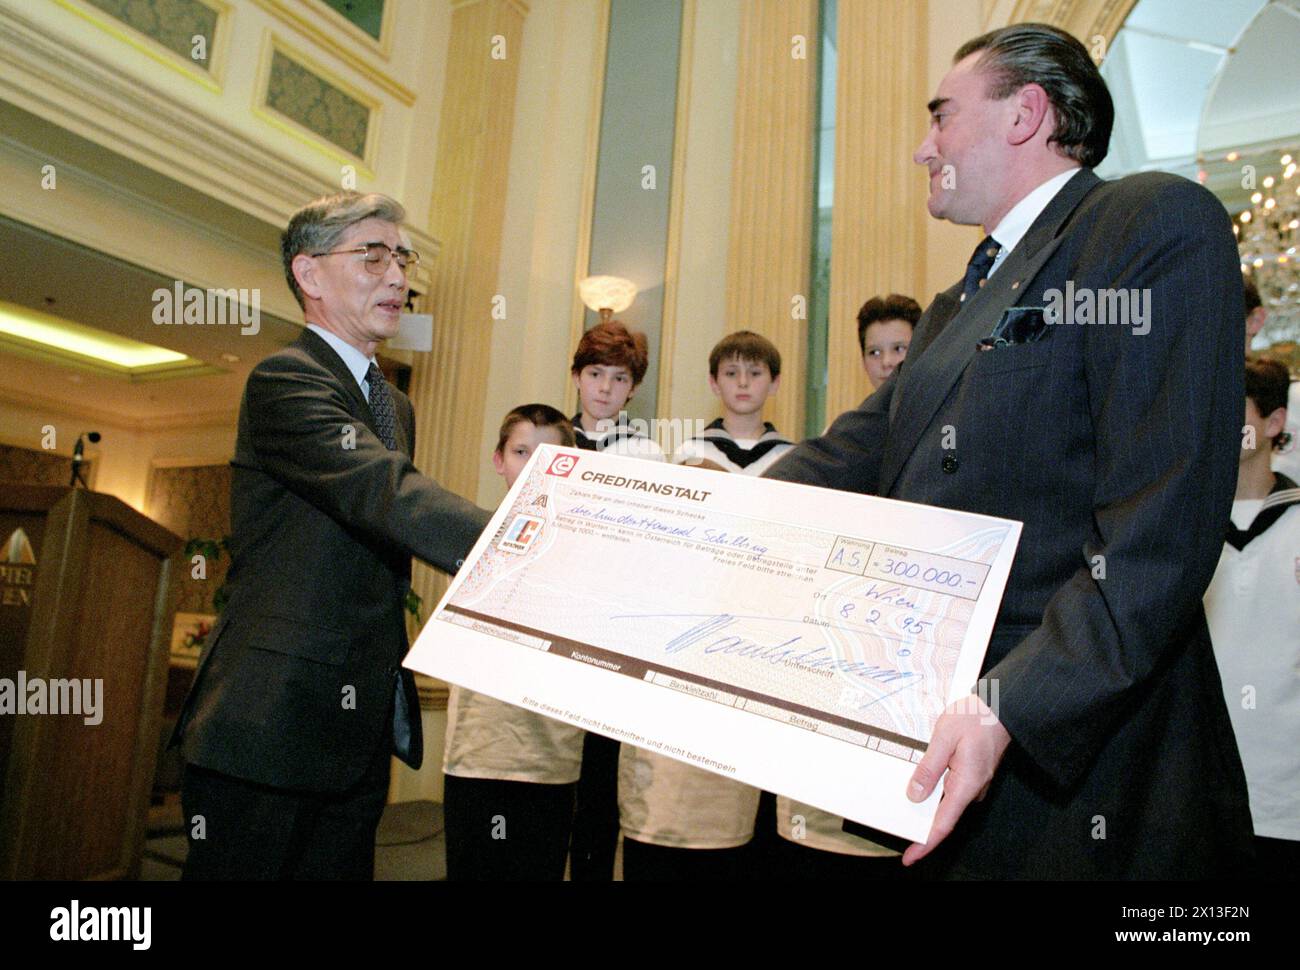 Vienna on February 8th 1995: Vienna Boys' Choir gave a concert in benefit of children in the earthquake threatened area of Kobe, Japan. In the picture: Tsuyoshi Kurokawa (l.), Japanese ambassador to Austria, receives a cheque of 300.000 Austrian Schillings from the Walter Tautschnig jun., director of the choir. - 19950208 PD0007 - Rechteinfo: Rights Managed (RM) Stock Photo